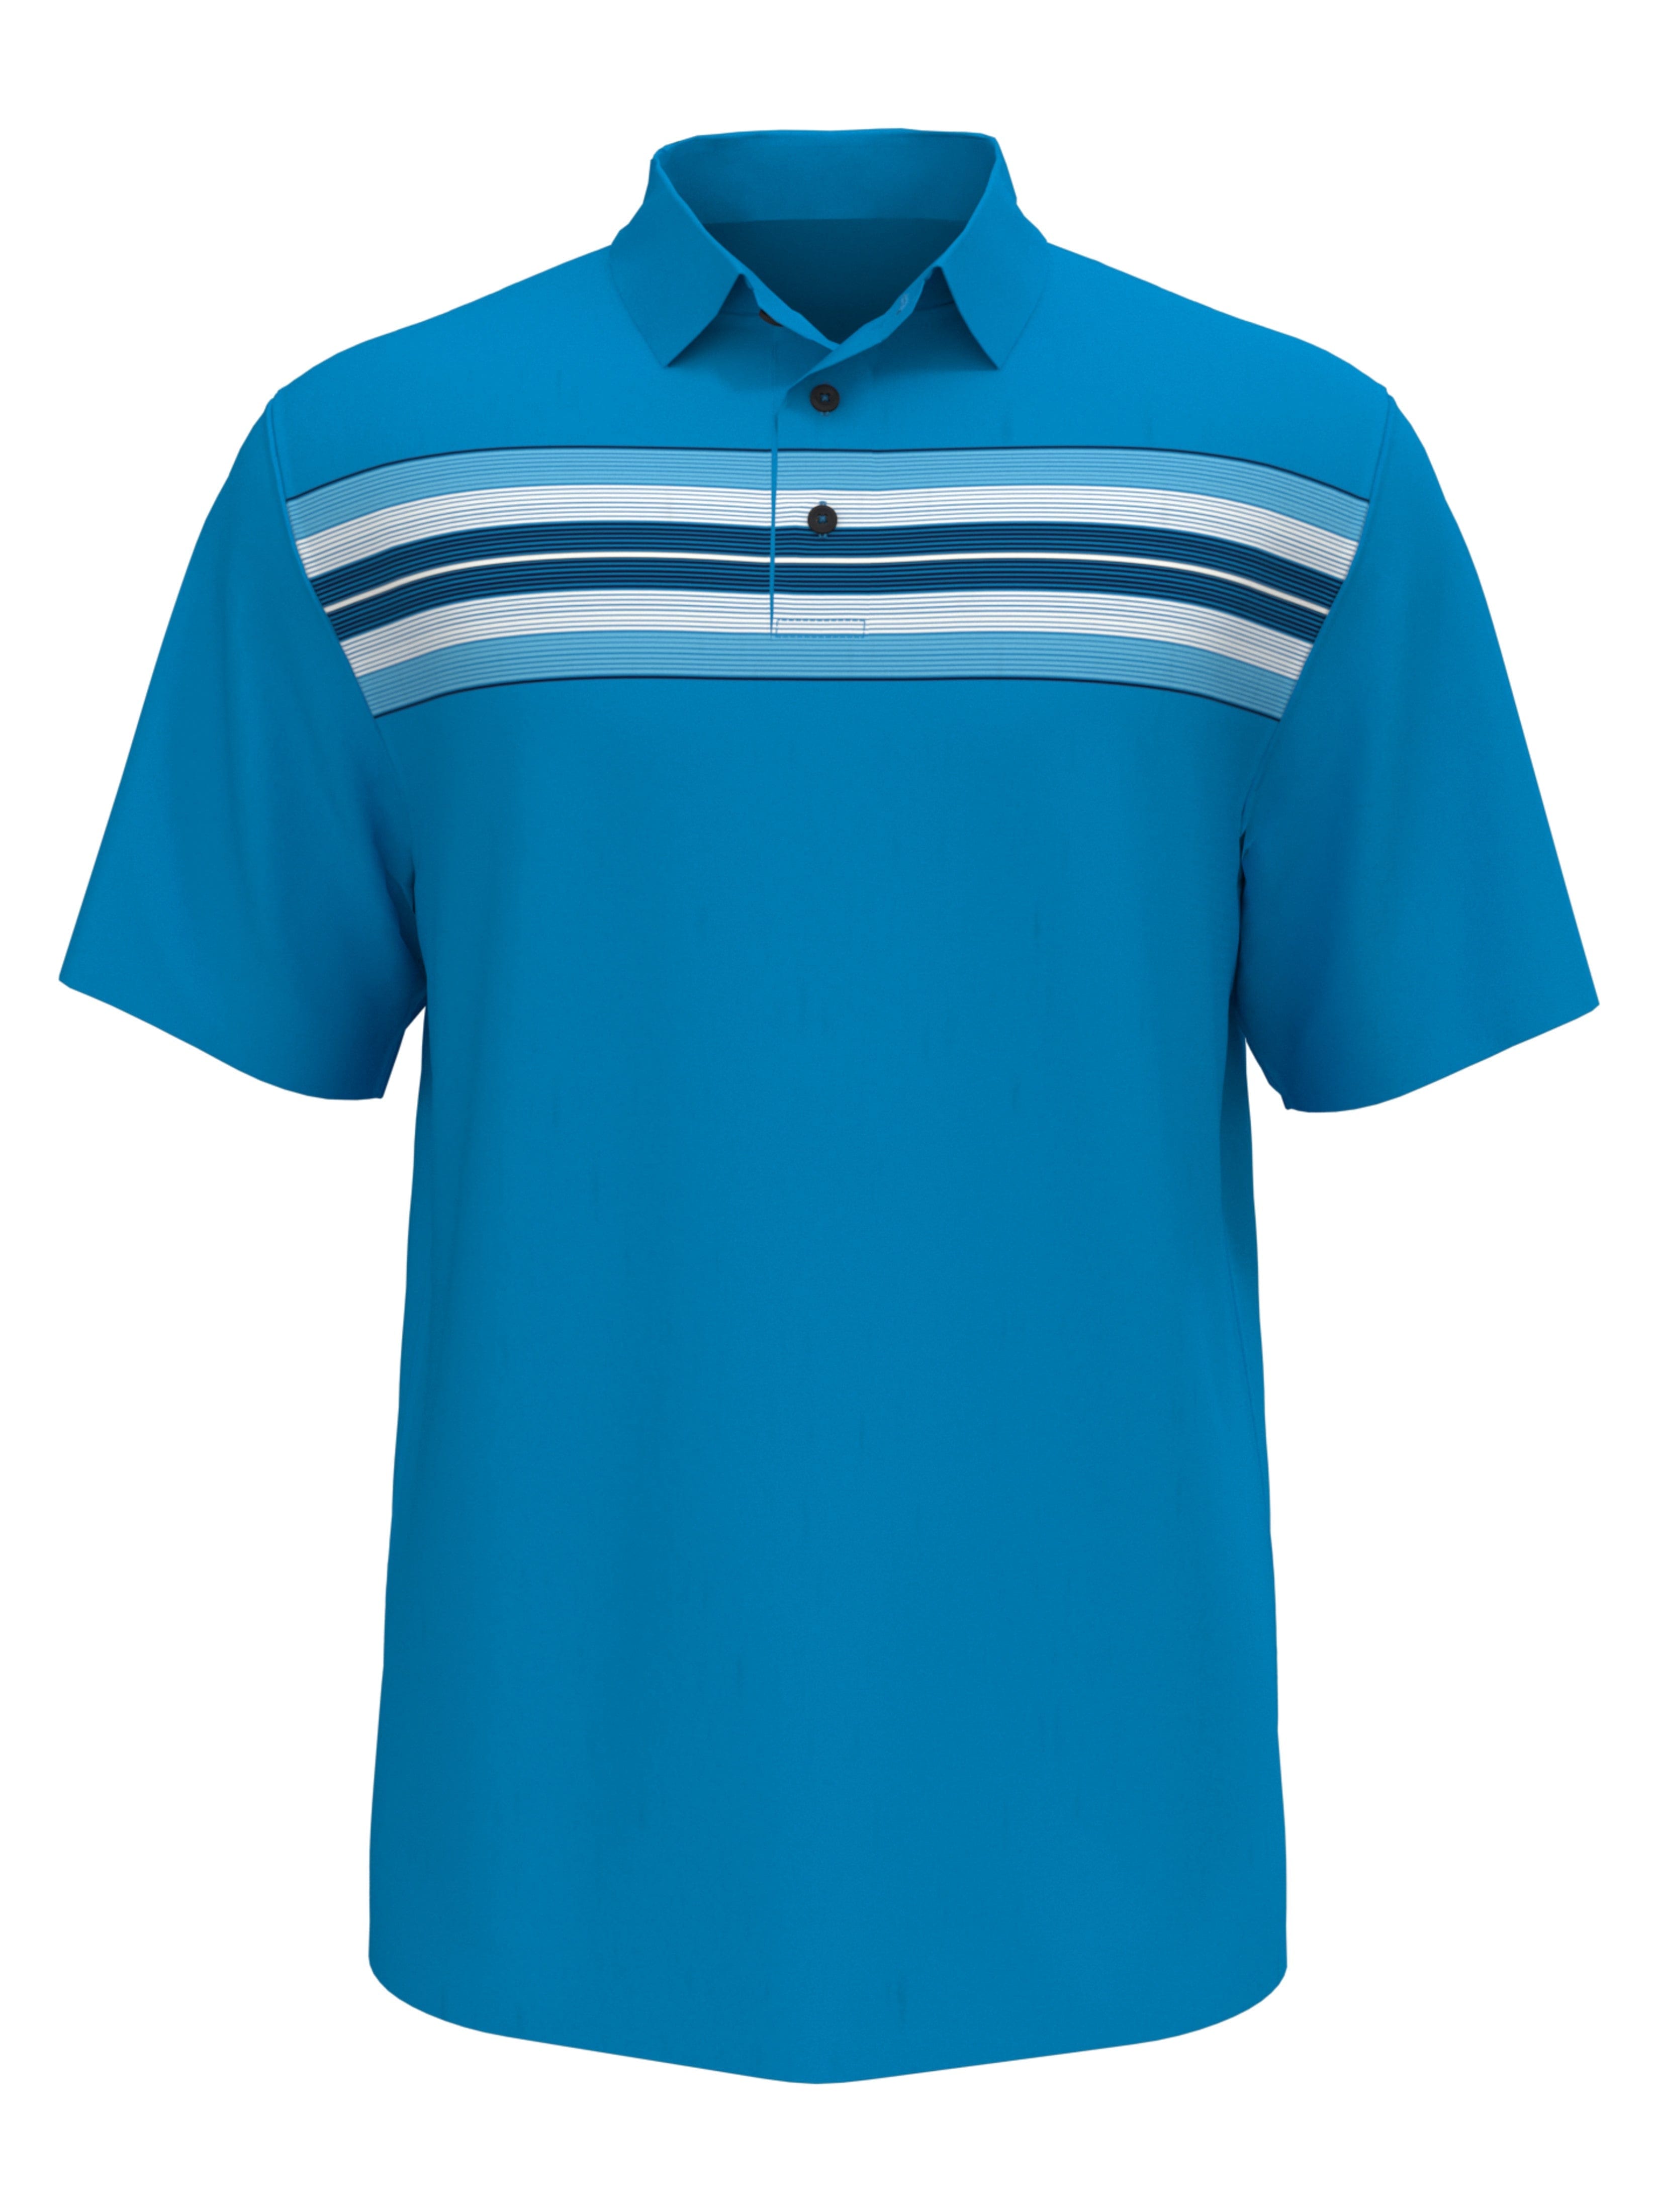 Jack Nicklaus Mens Chest Energy Stripe Polo Shirt, Size 2XL, Blithe Blue, 100% Polyester | Golf Apparel Shop